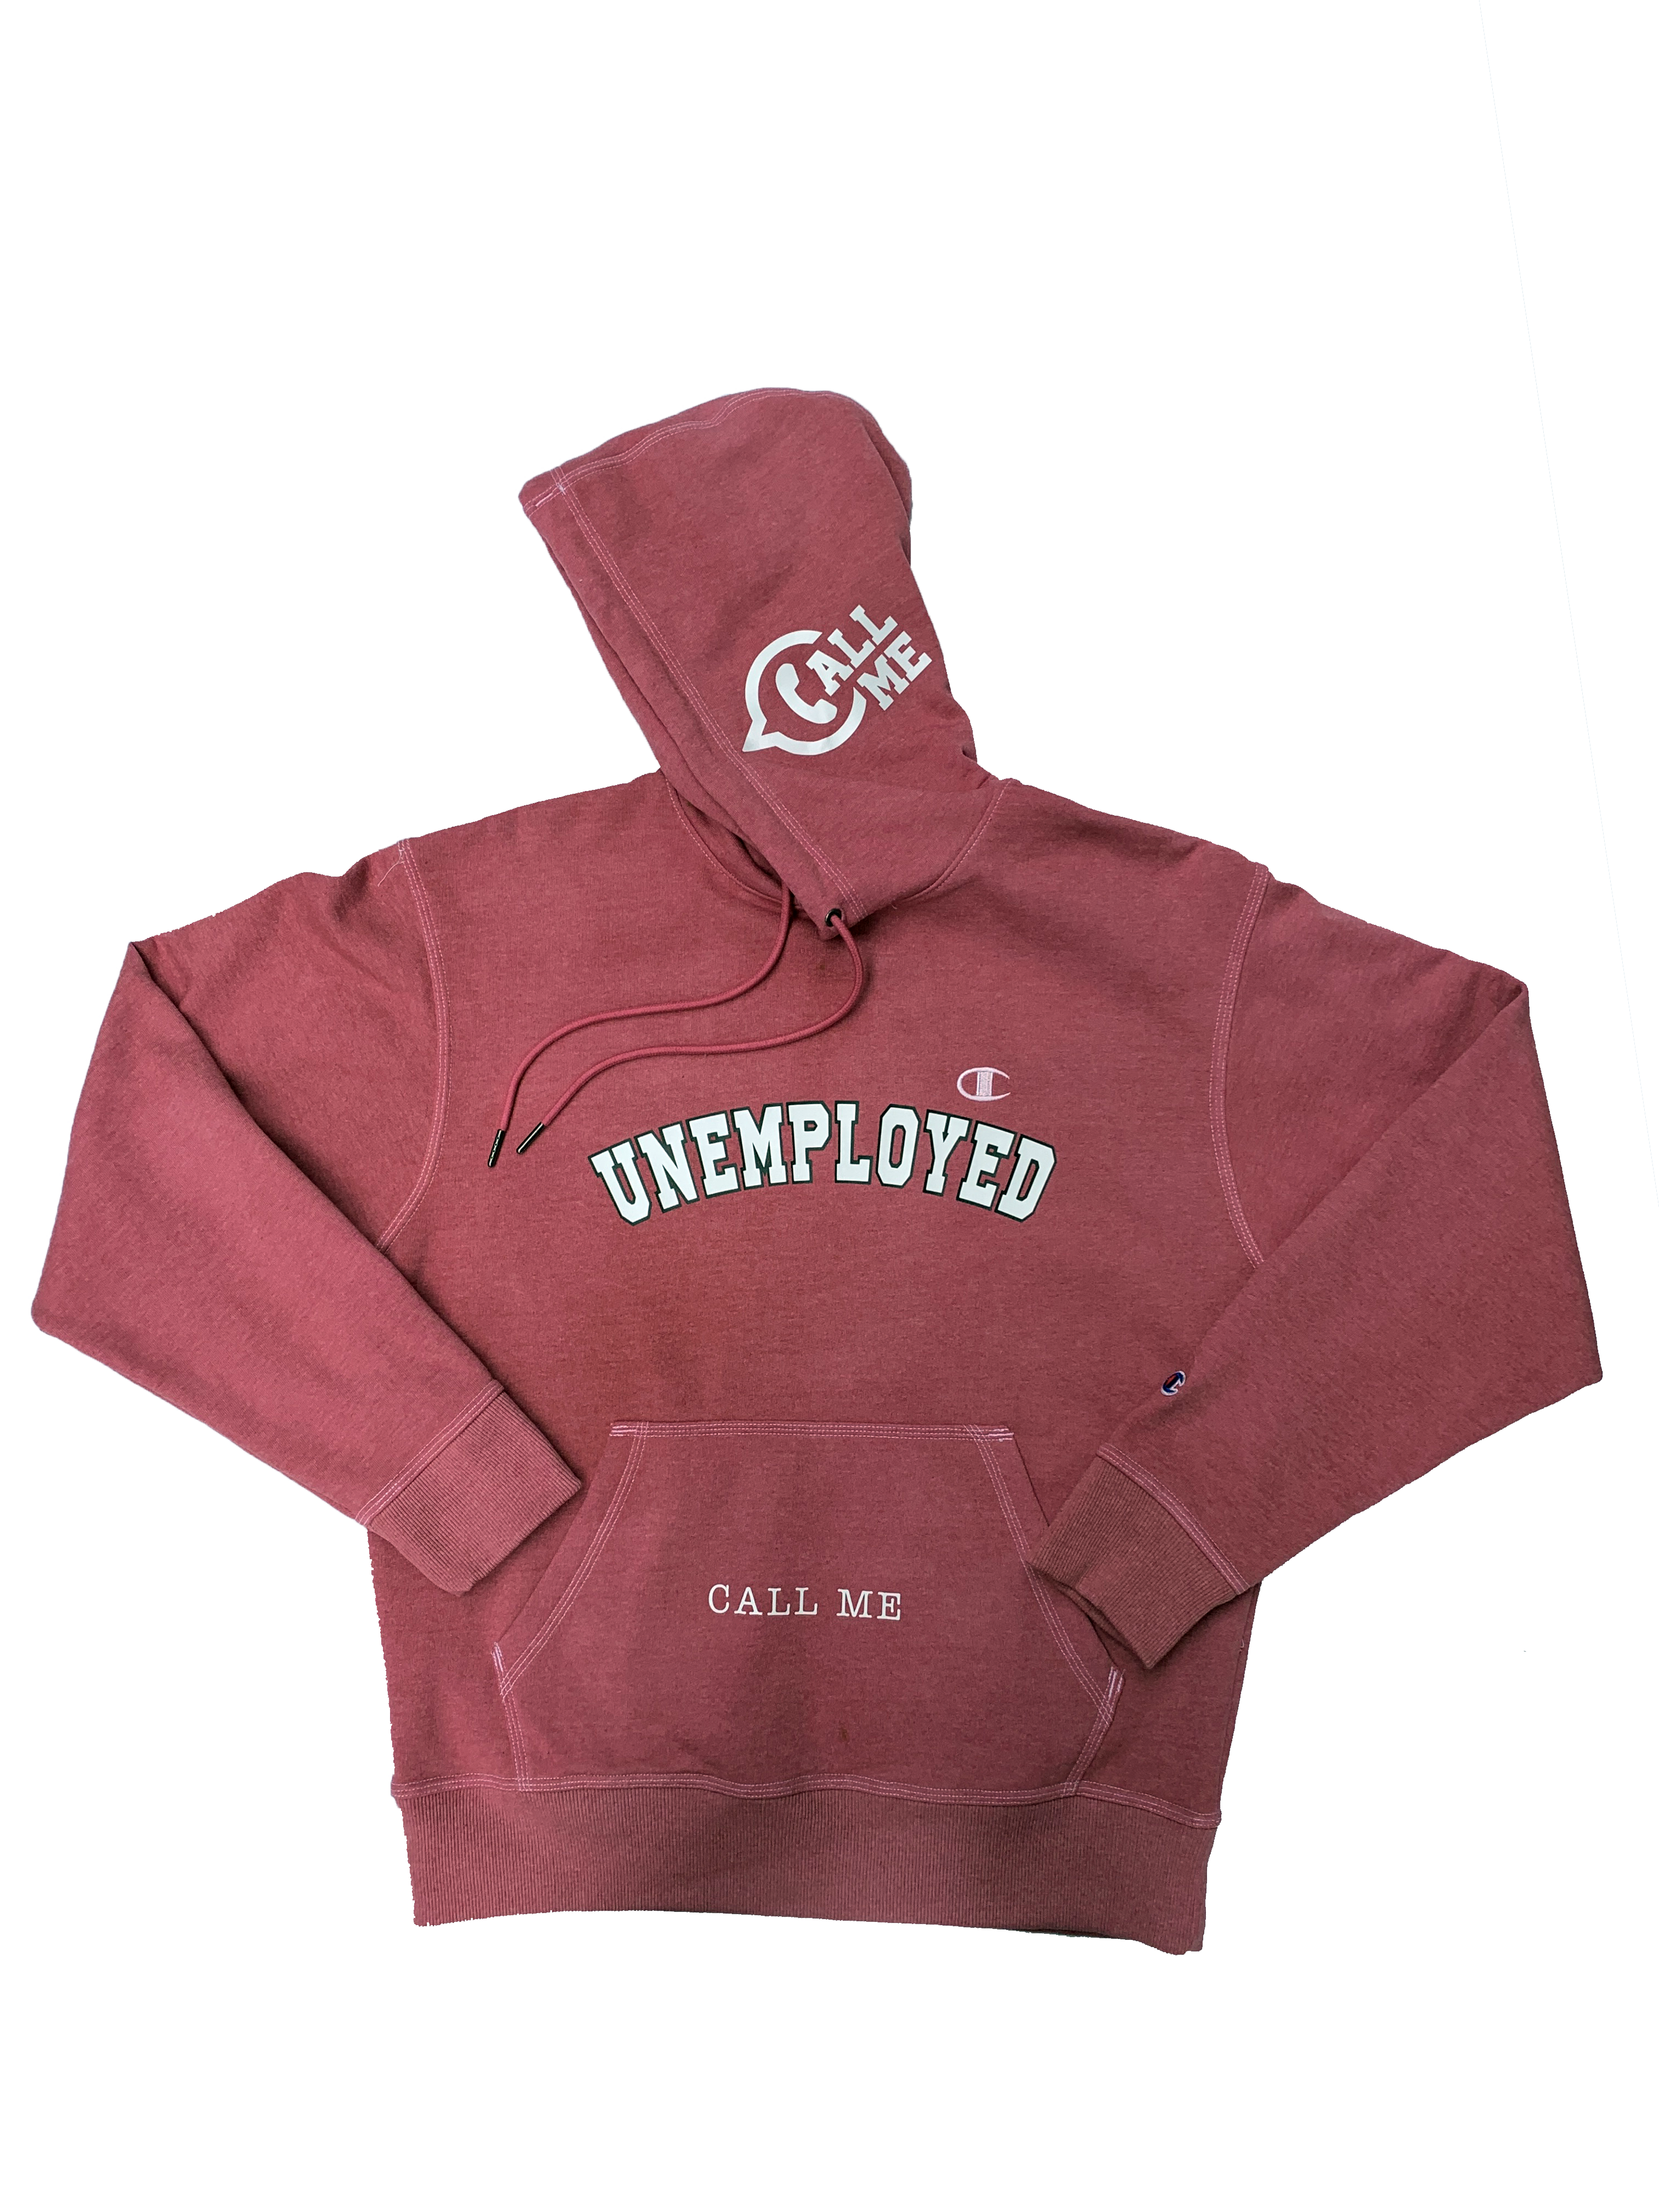 UNEMPLOYED Pull-Over Hoodie 